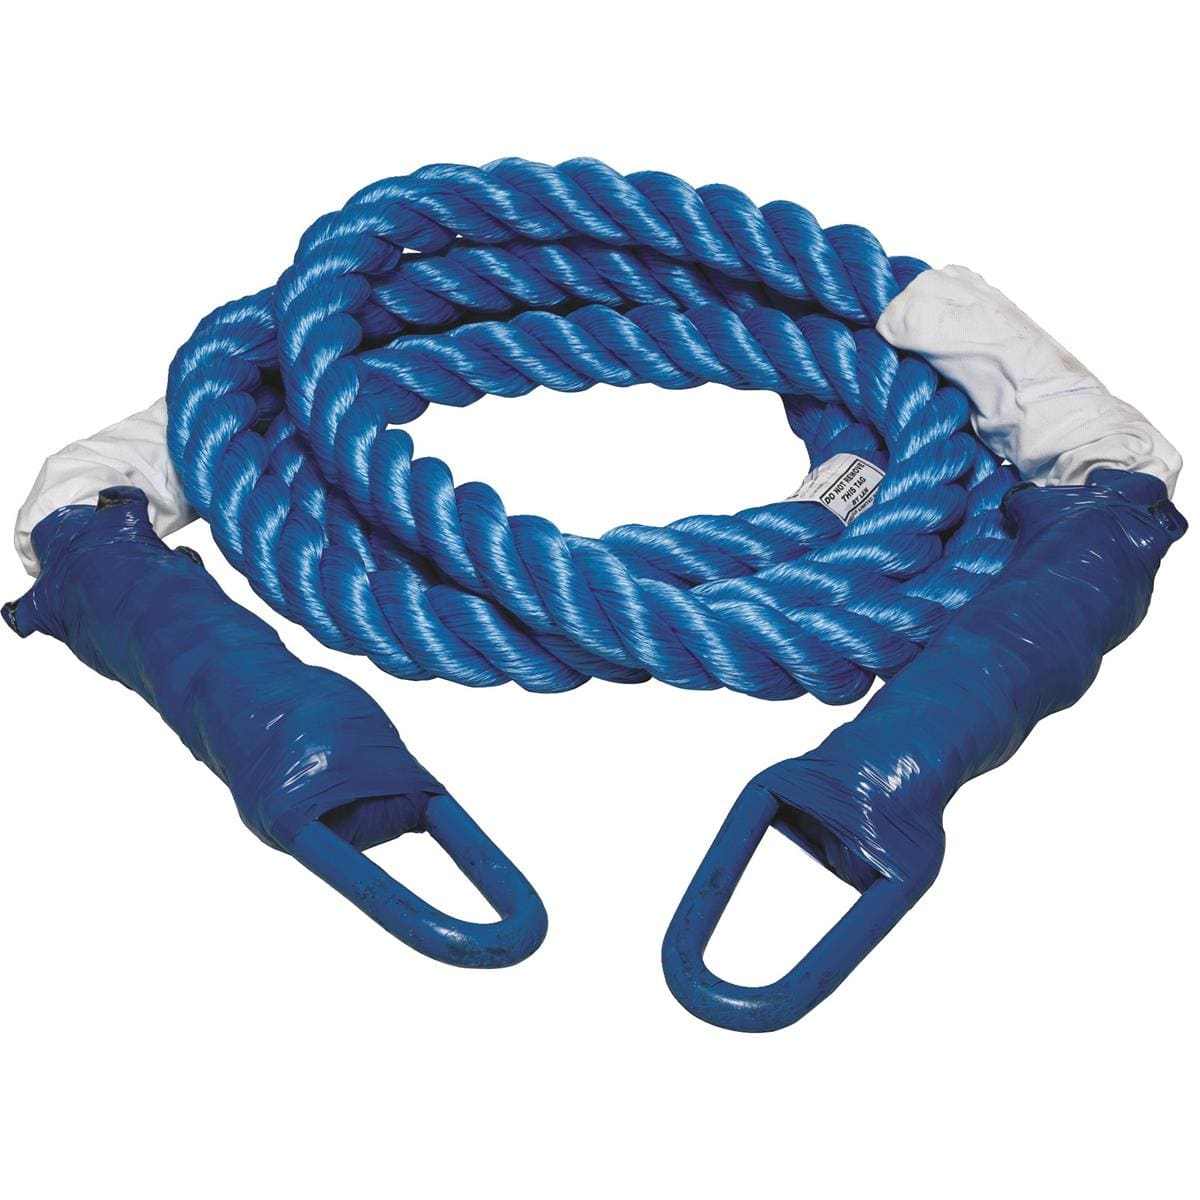 30'L Double D-Ring Tow Rope